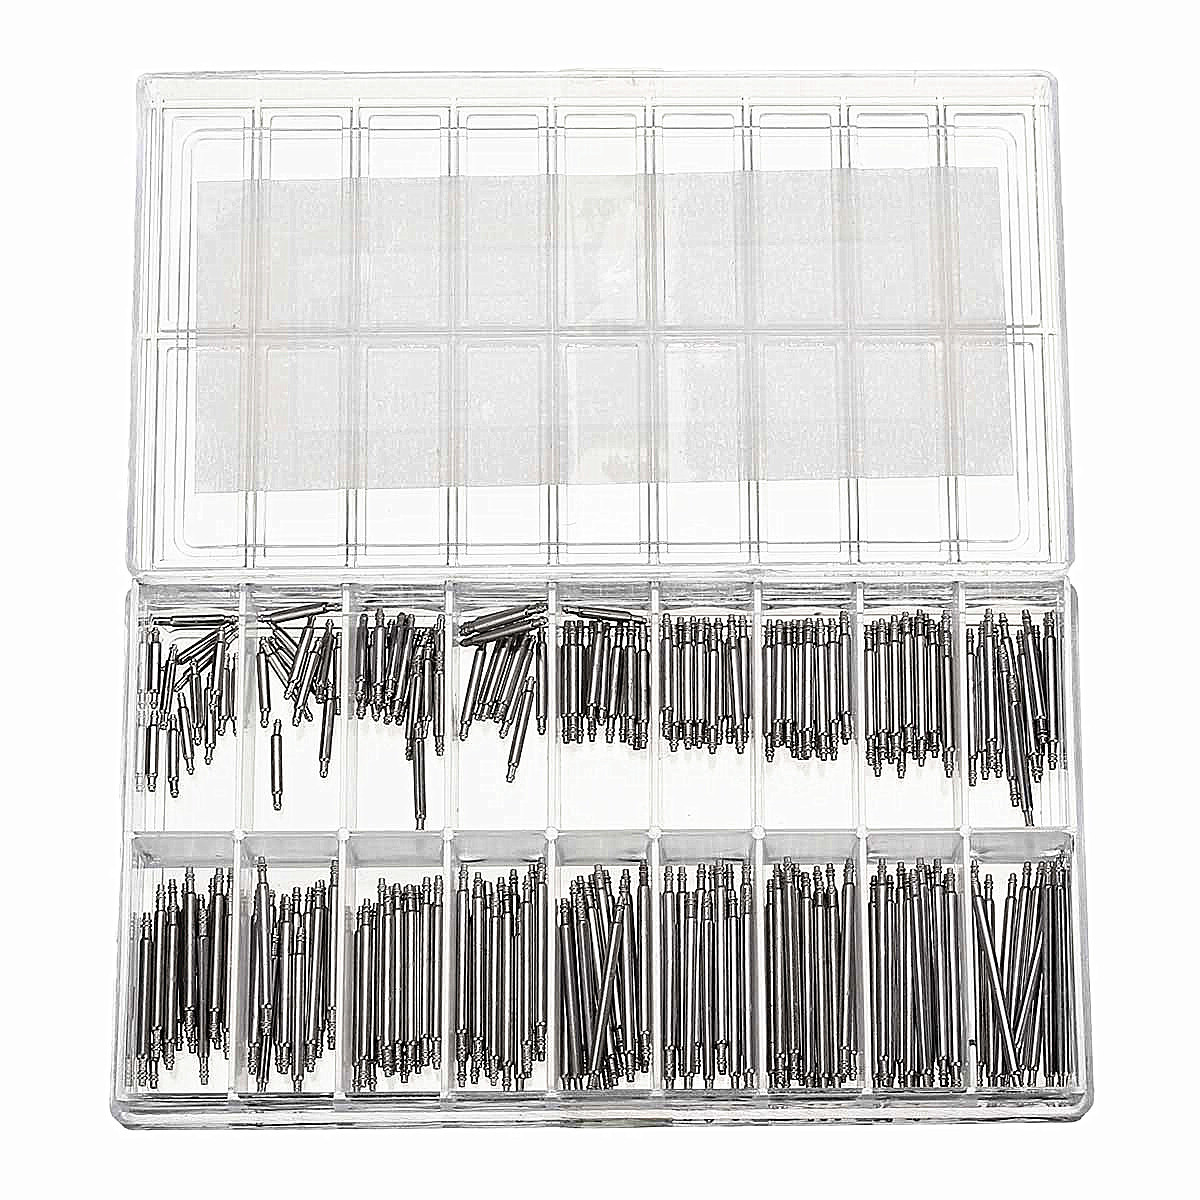 371pcs-Watch-Repair-Tool-Kit-Watchmaker-Opener-Remover-Spring-Pin-Bar-With-Case-1042812